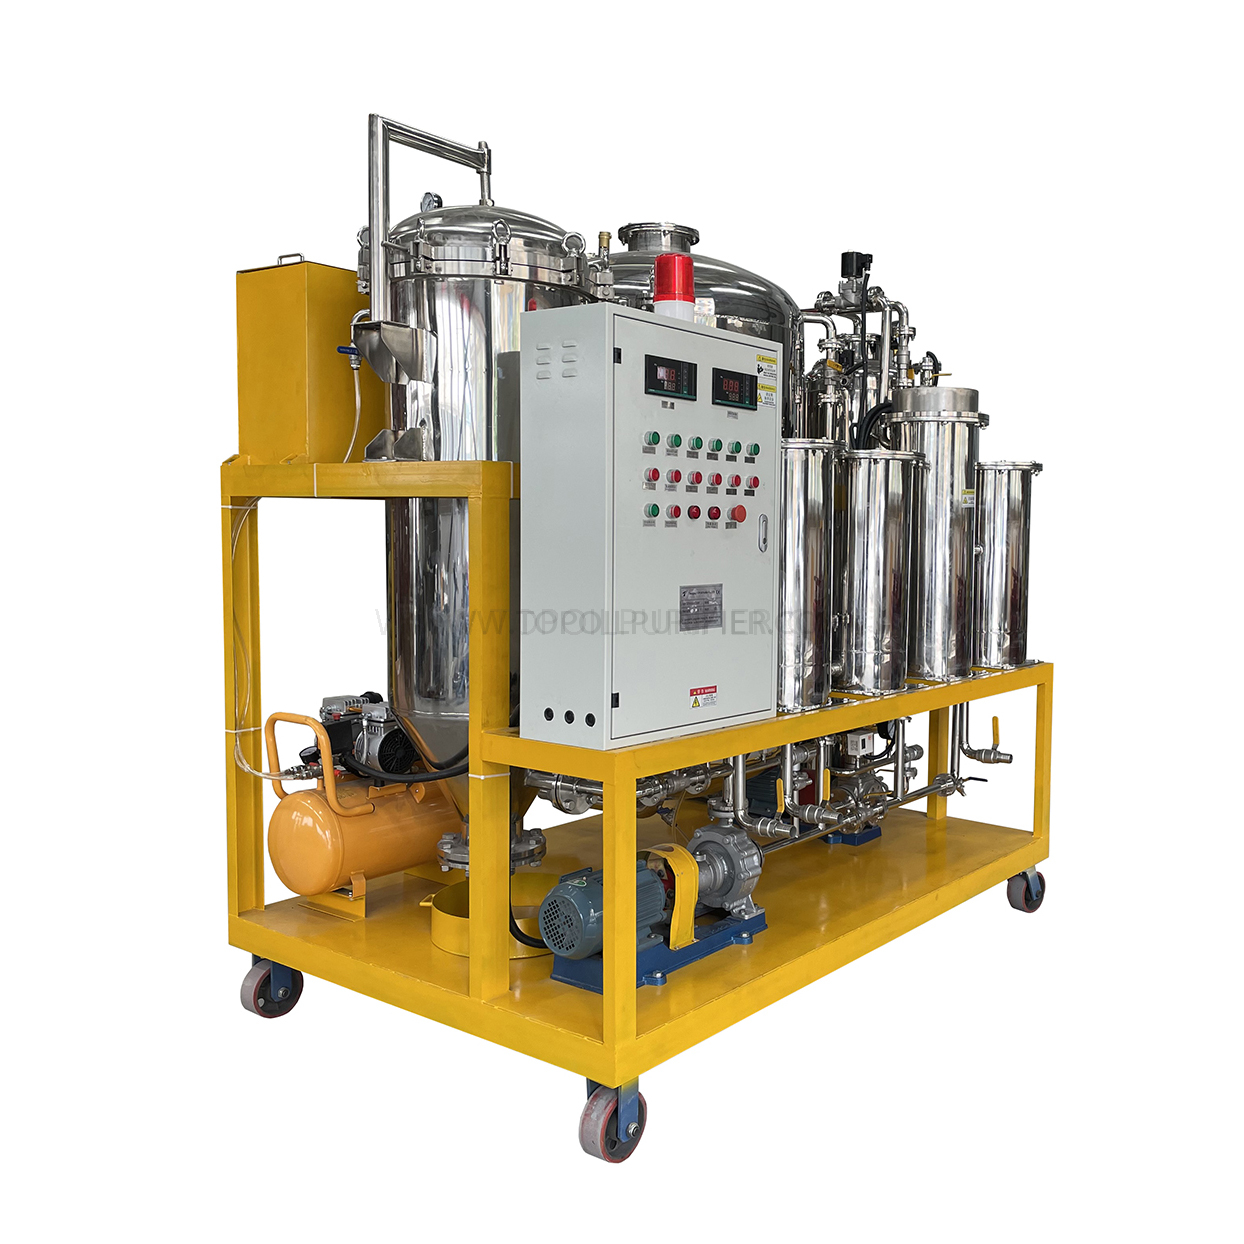 TYS Food Grade Stainless Steel Oil Purification and Decoloration Equipment